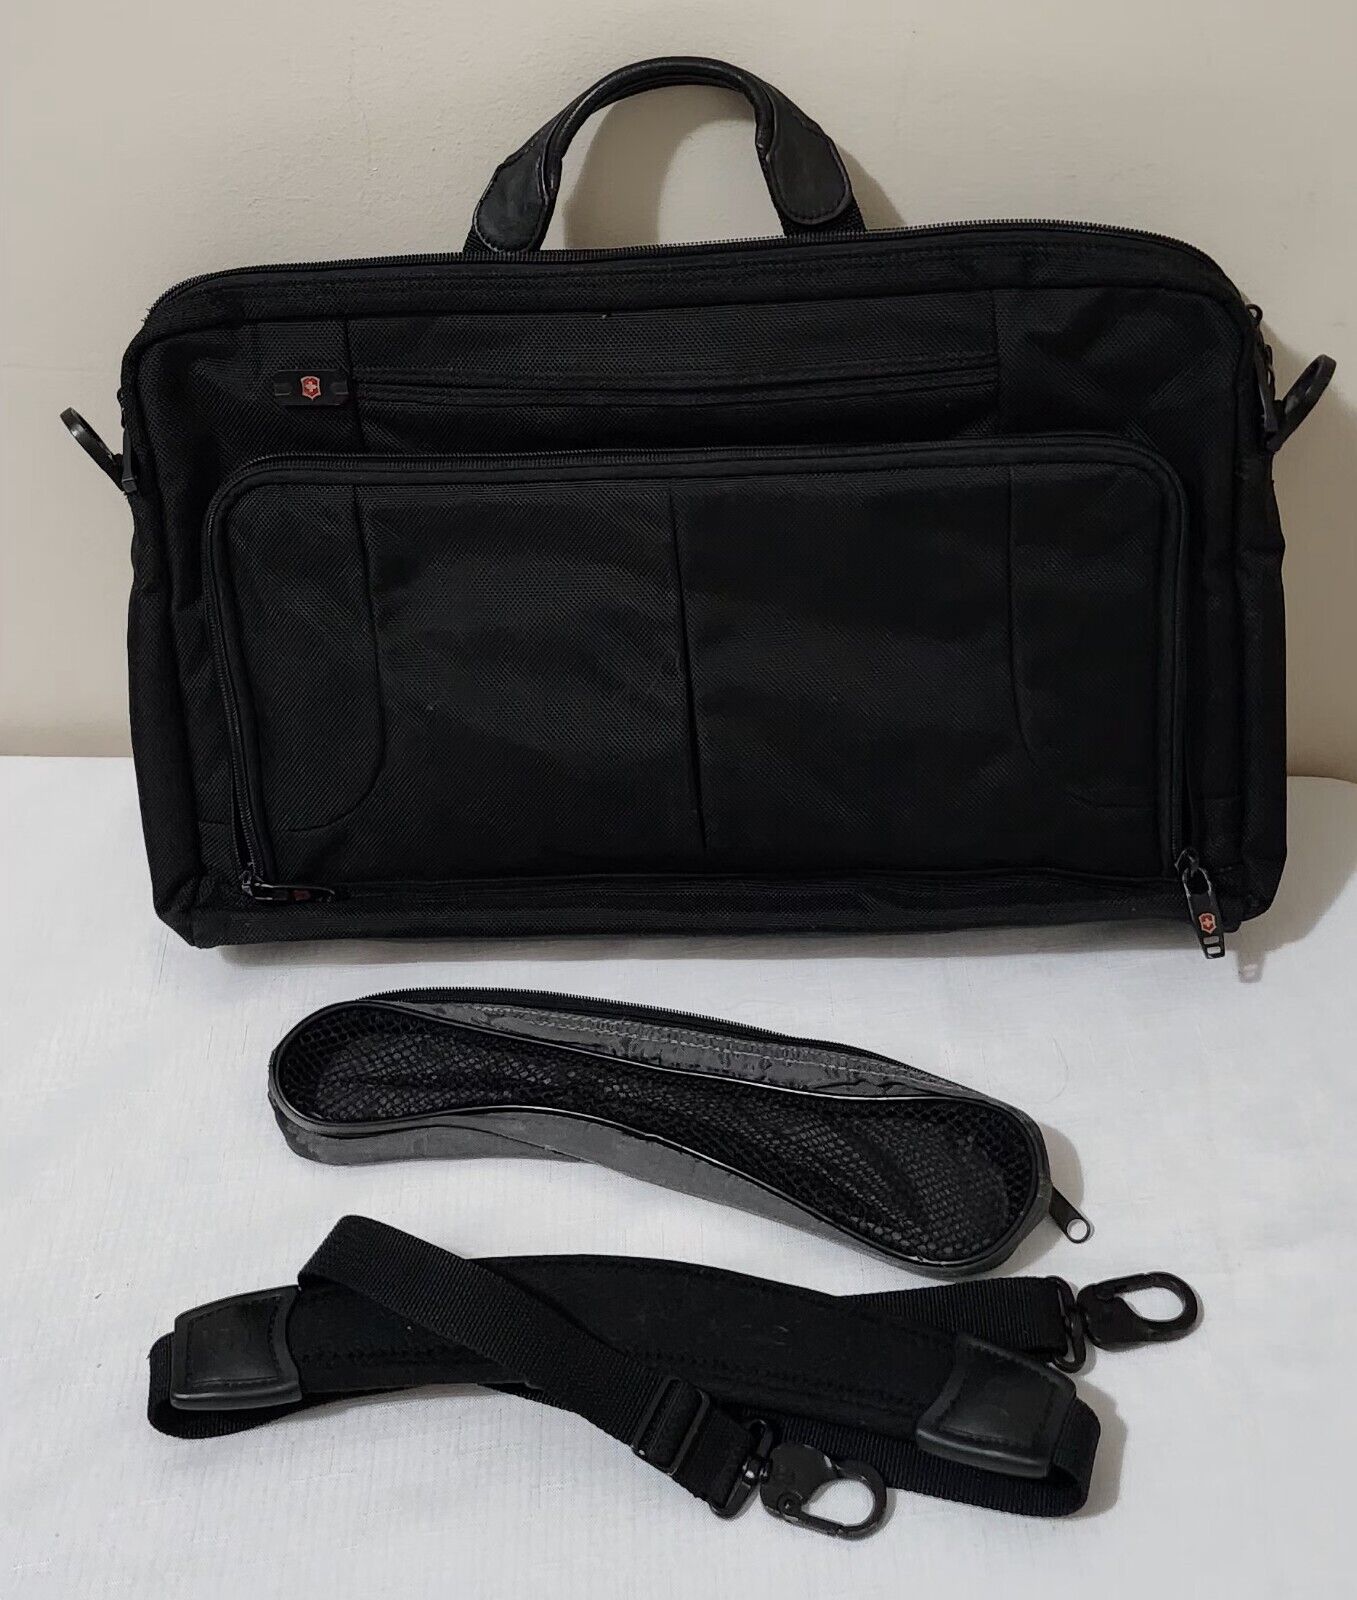 Victorinox by Swiss Army Knife Messenger, Laptop Case/Bag Black rarely used 